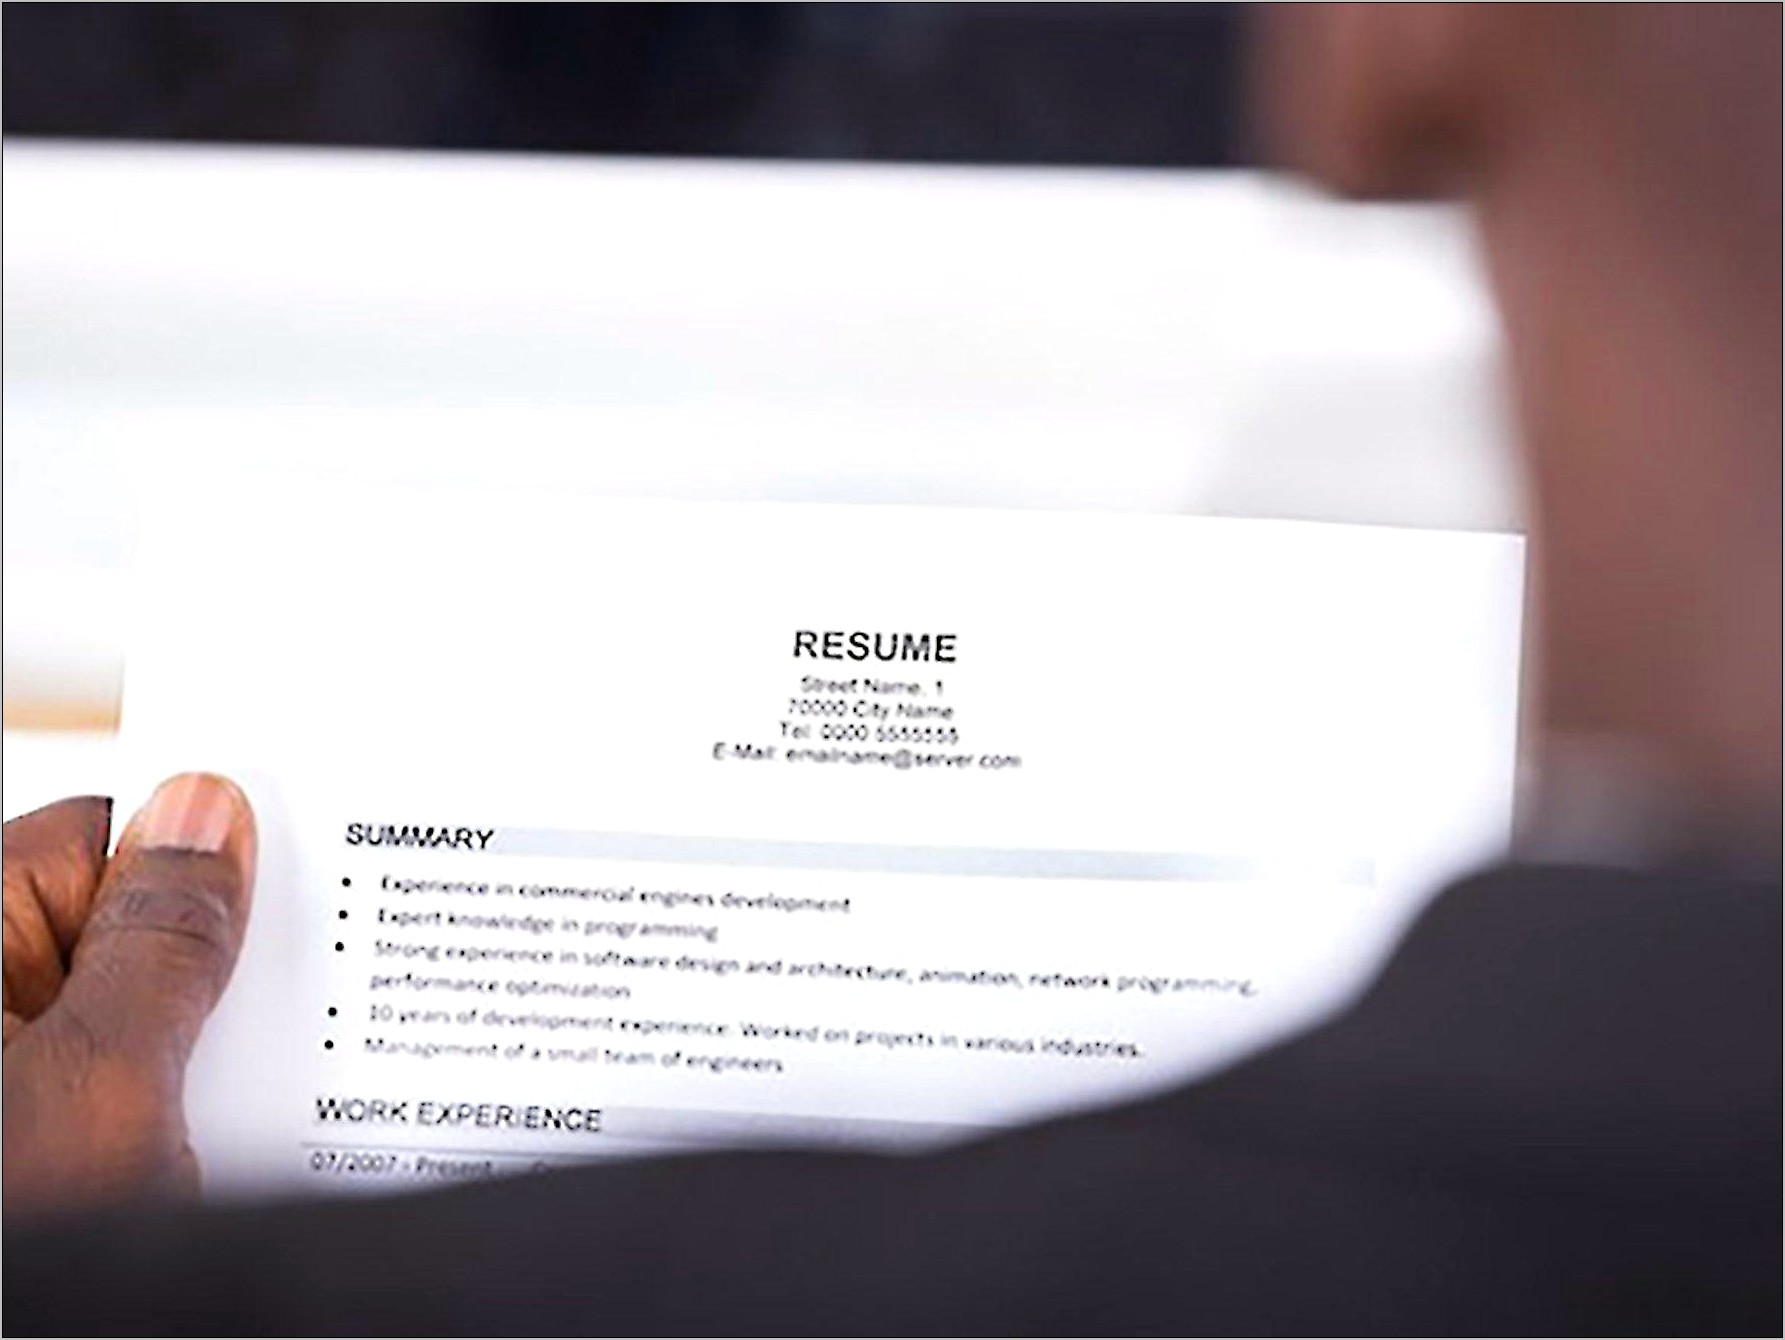 Is It Good To Use Jargon On Resume